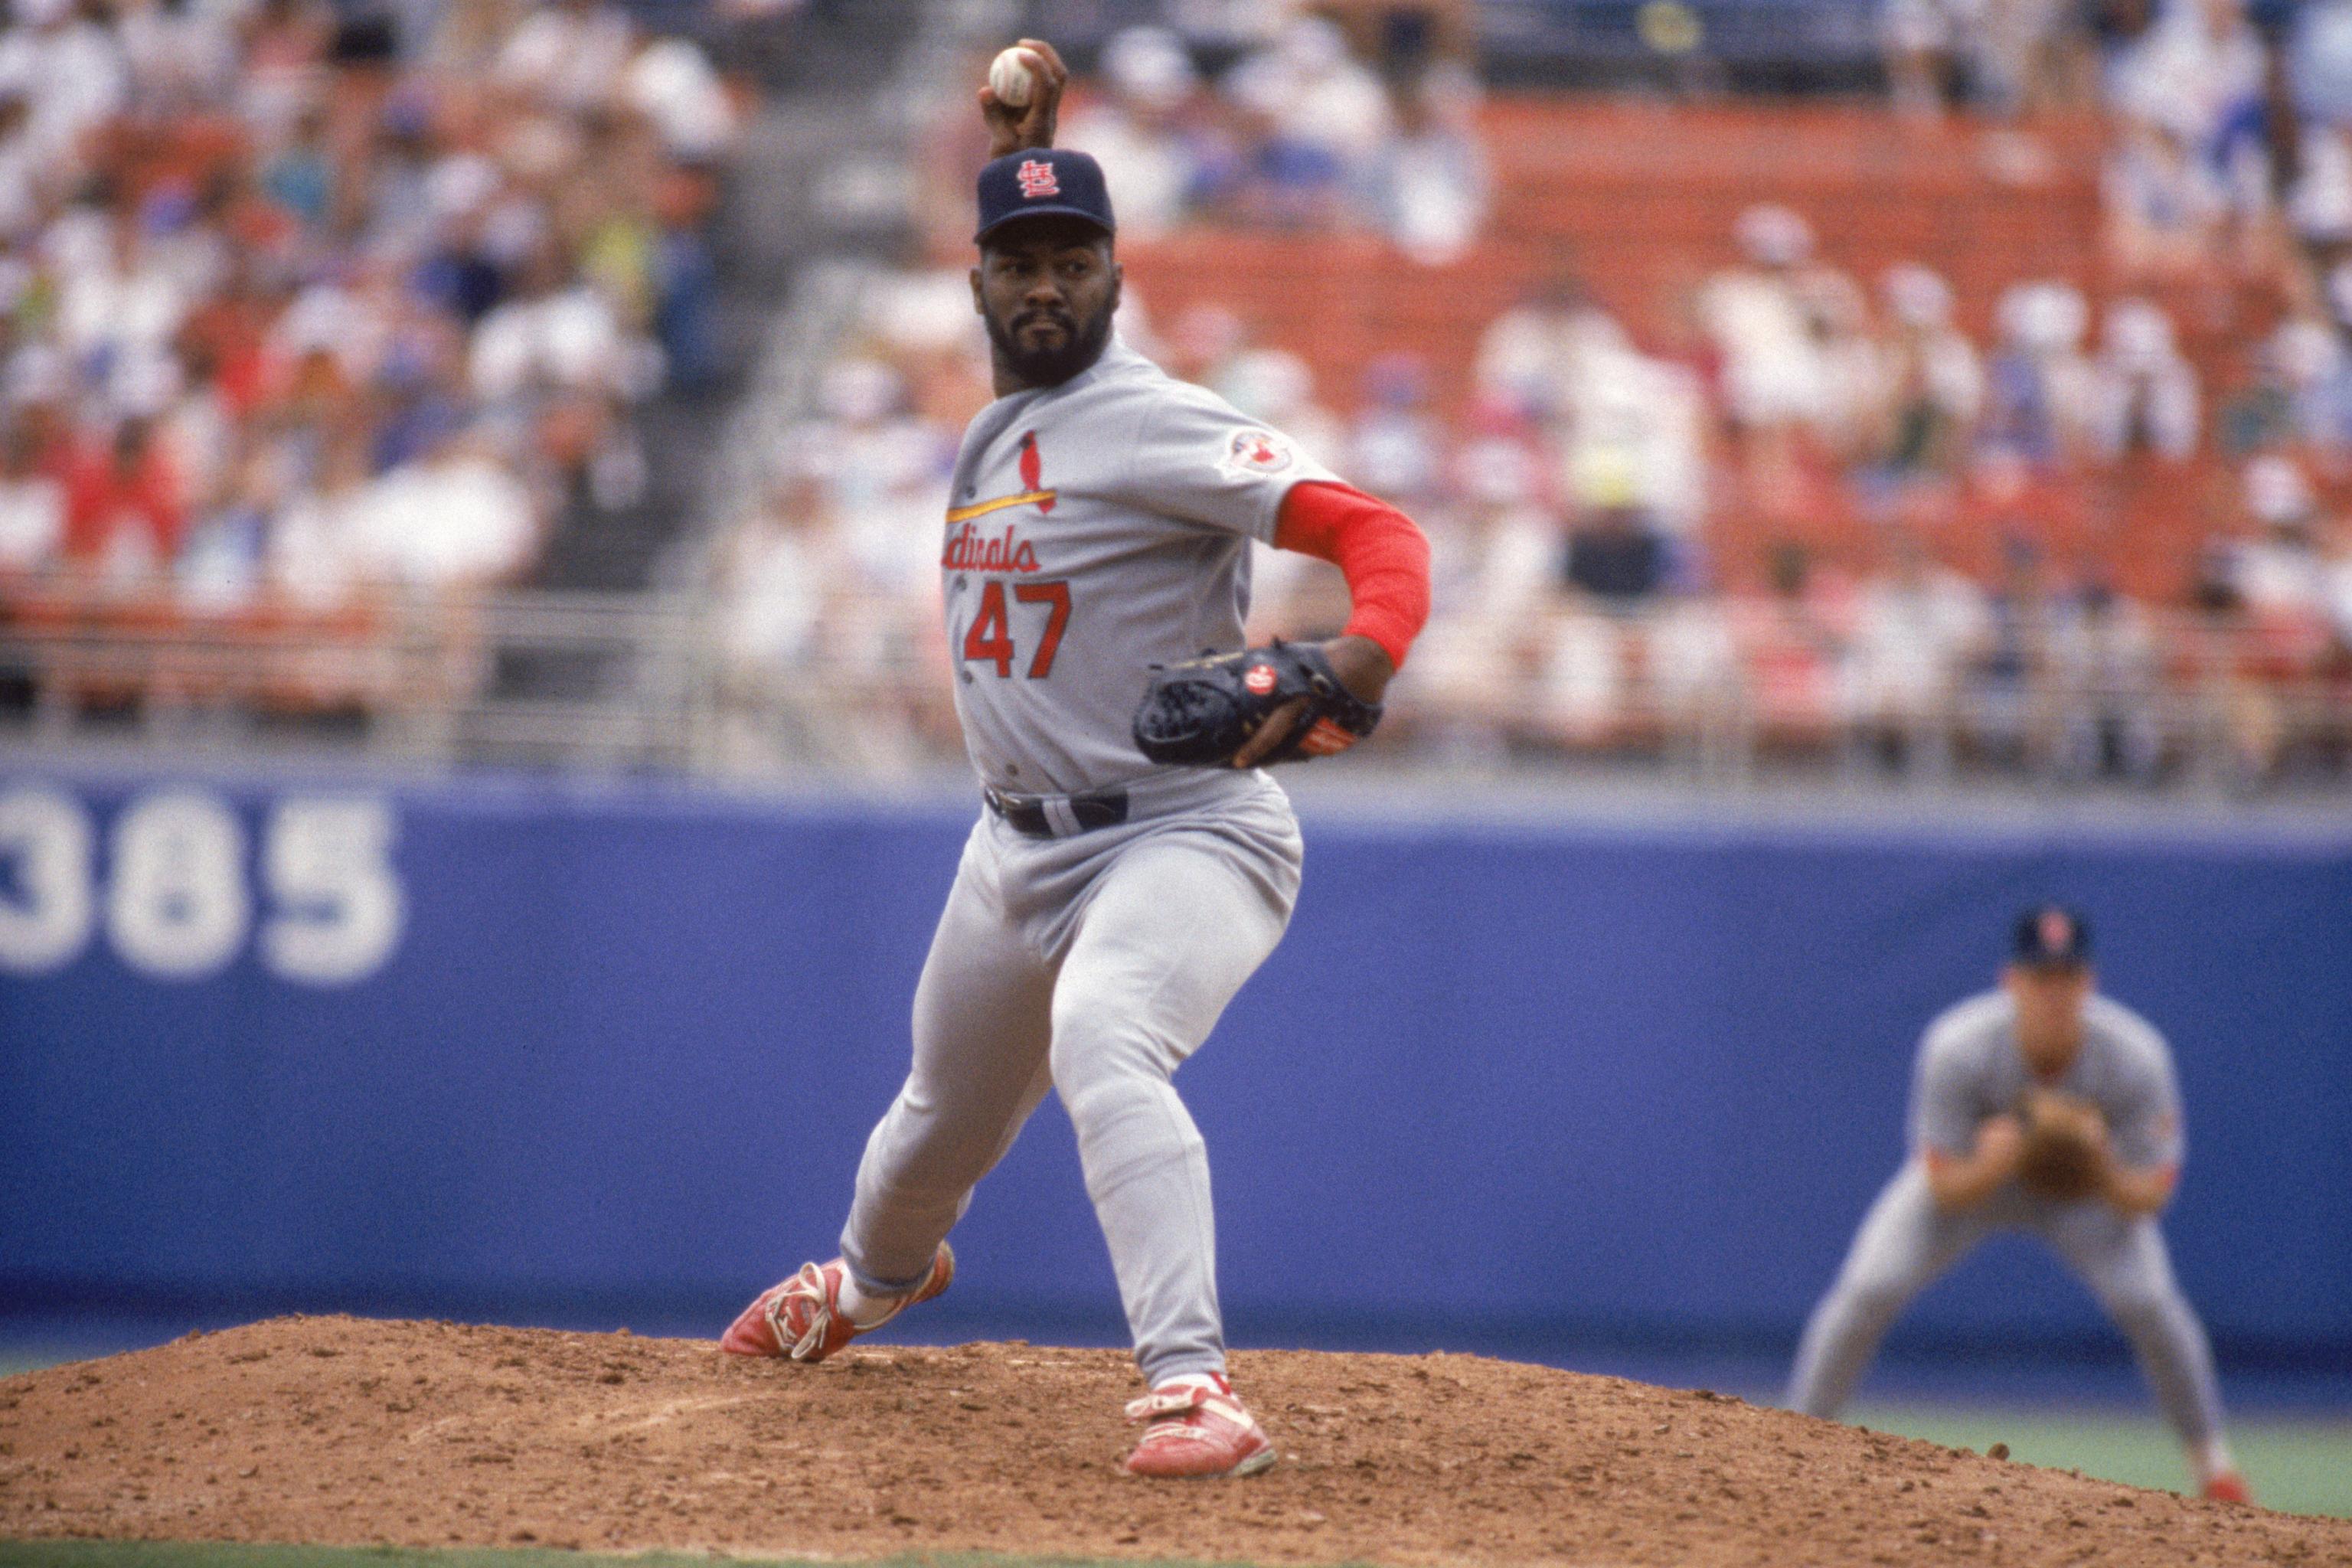 Harold Baines, Lee Smith Elected to Baseball Hall of Fame